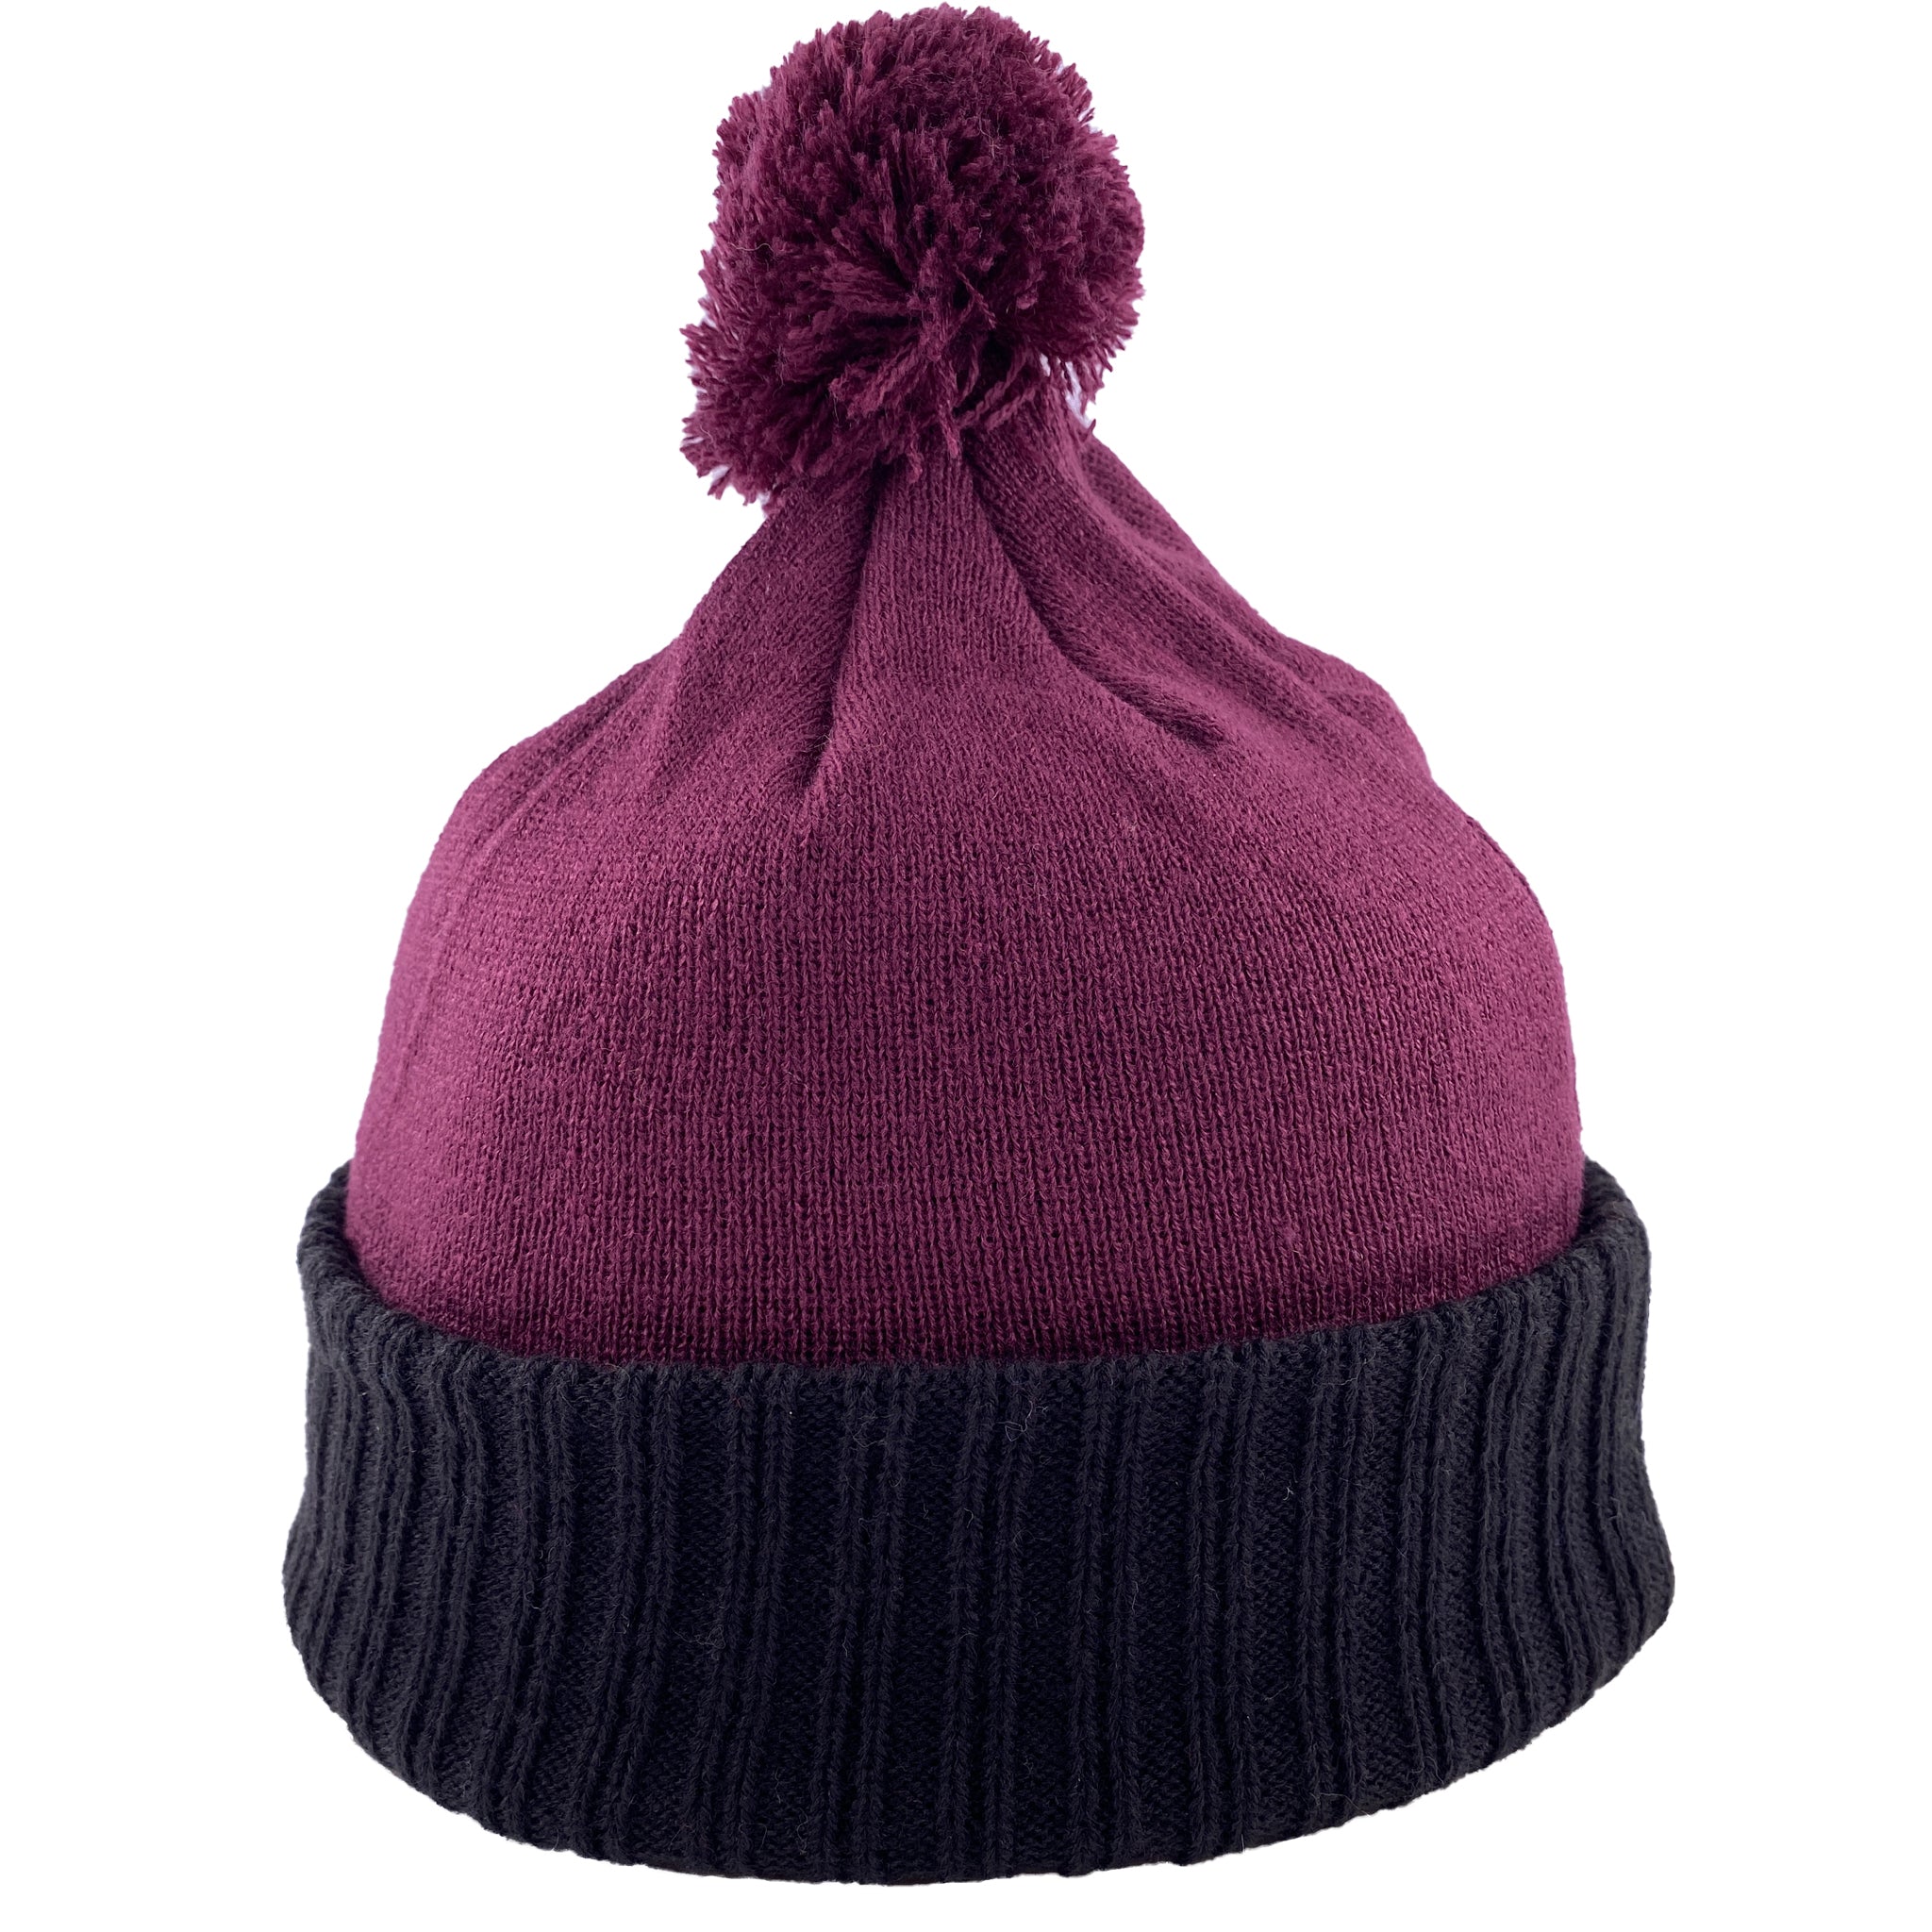 More Store Men\'s Champion Shoe Beanie and Pom That – with